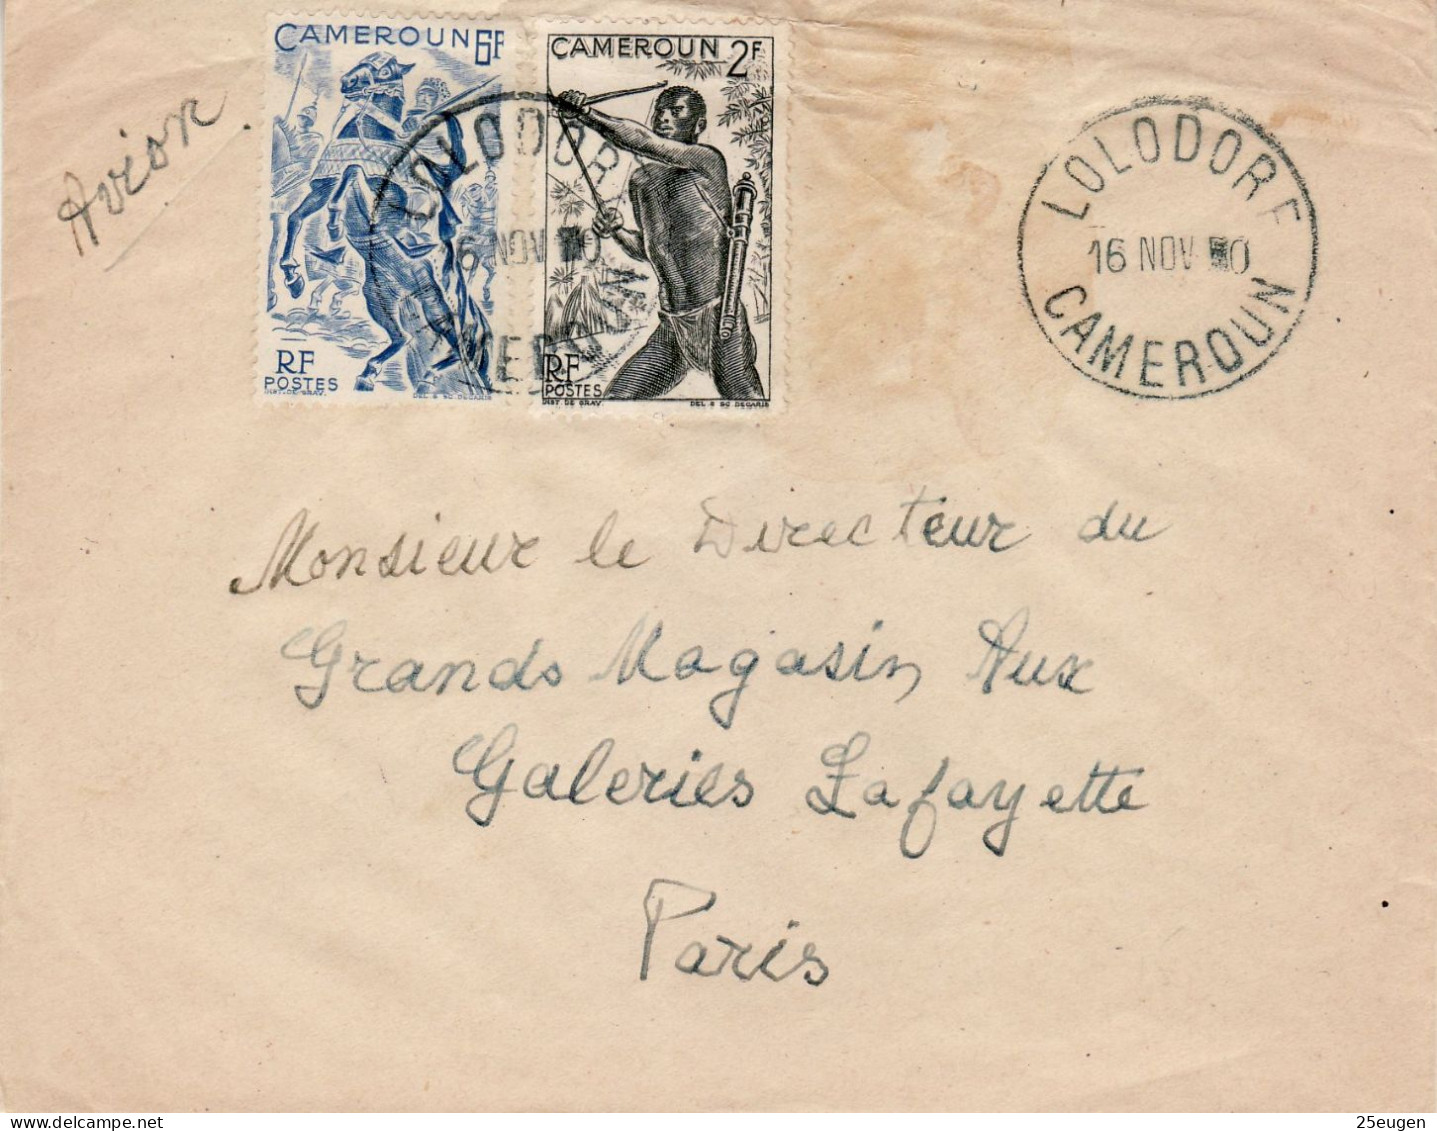 CAMEROUN 1950 AIRMAIL LETTER SENT FROM LOLODORE TO PARIS - Covers & Documents